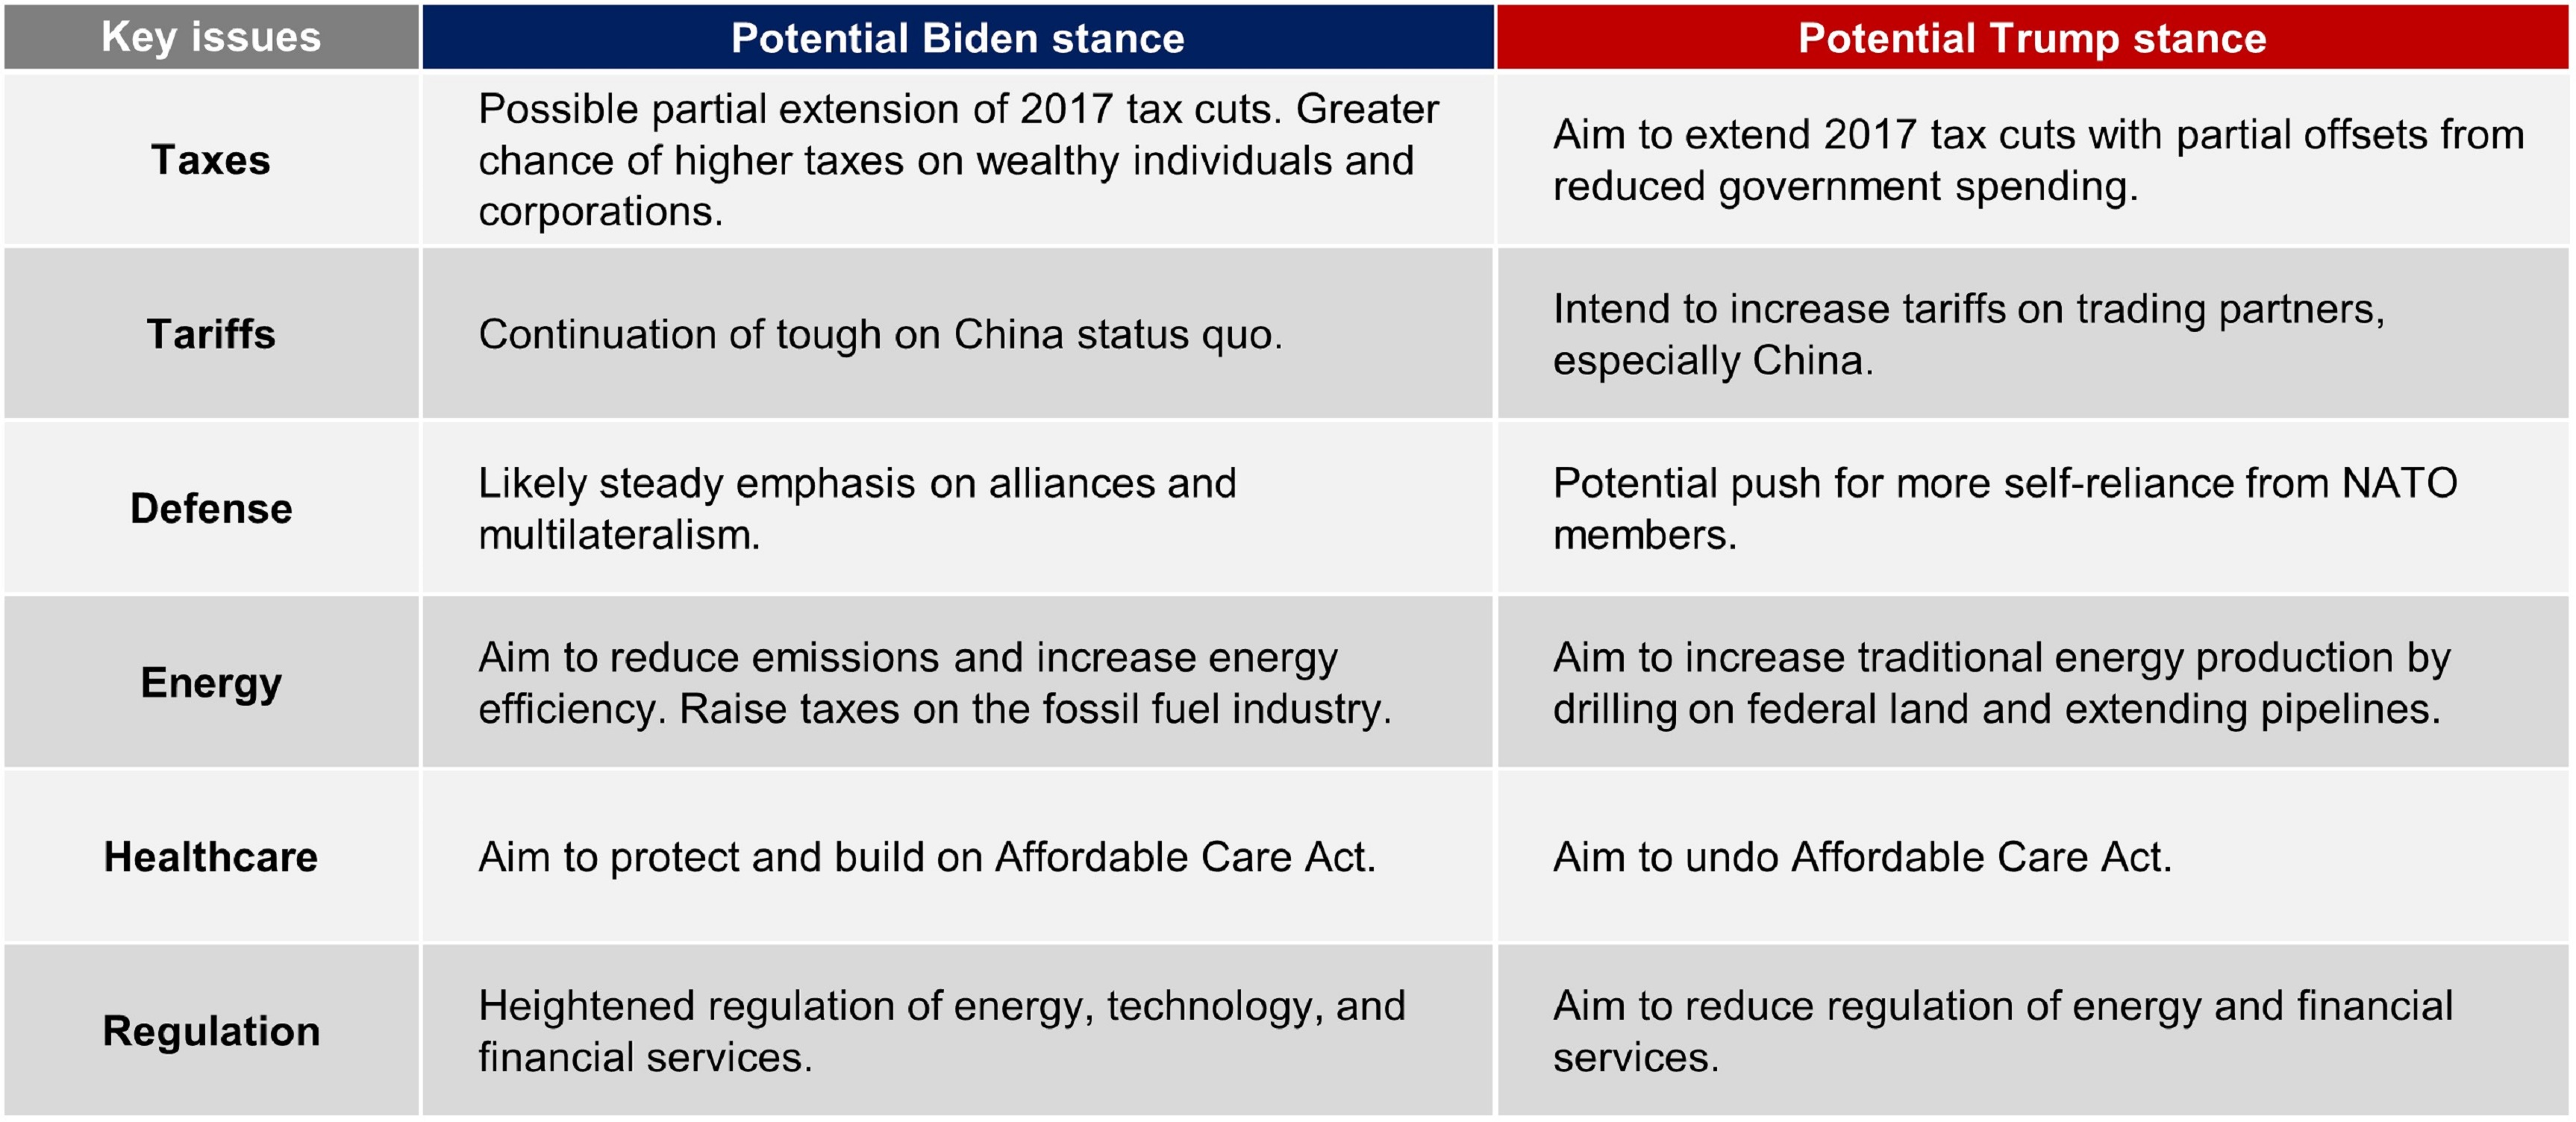 This table shows the key issues in the 2024 election, and the potential policy stances from President Biden and Republican nominee Trump.